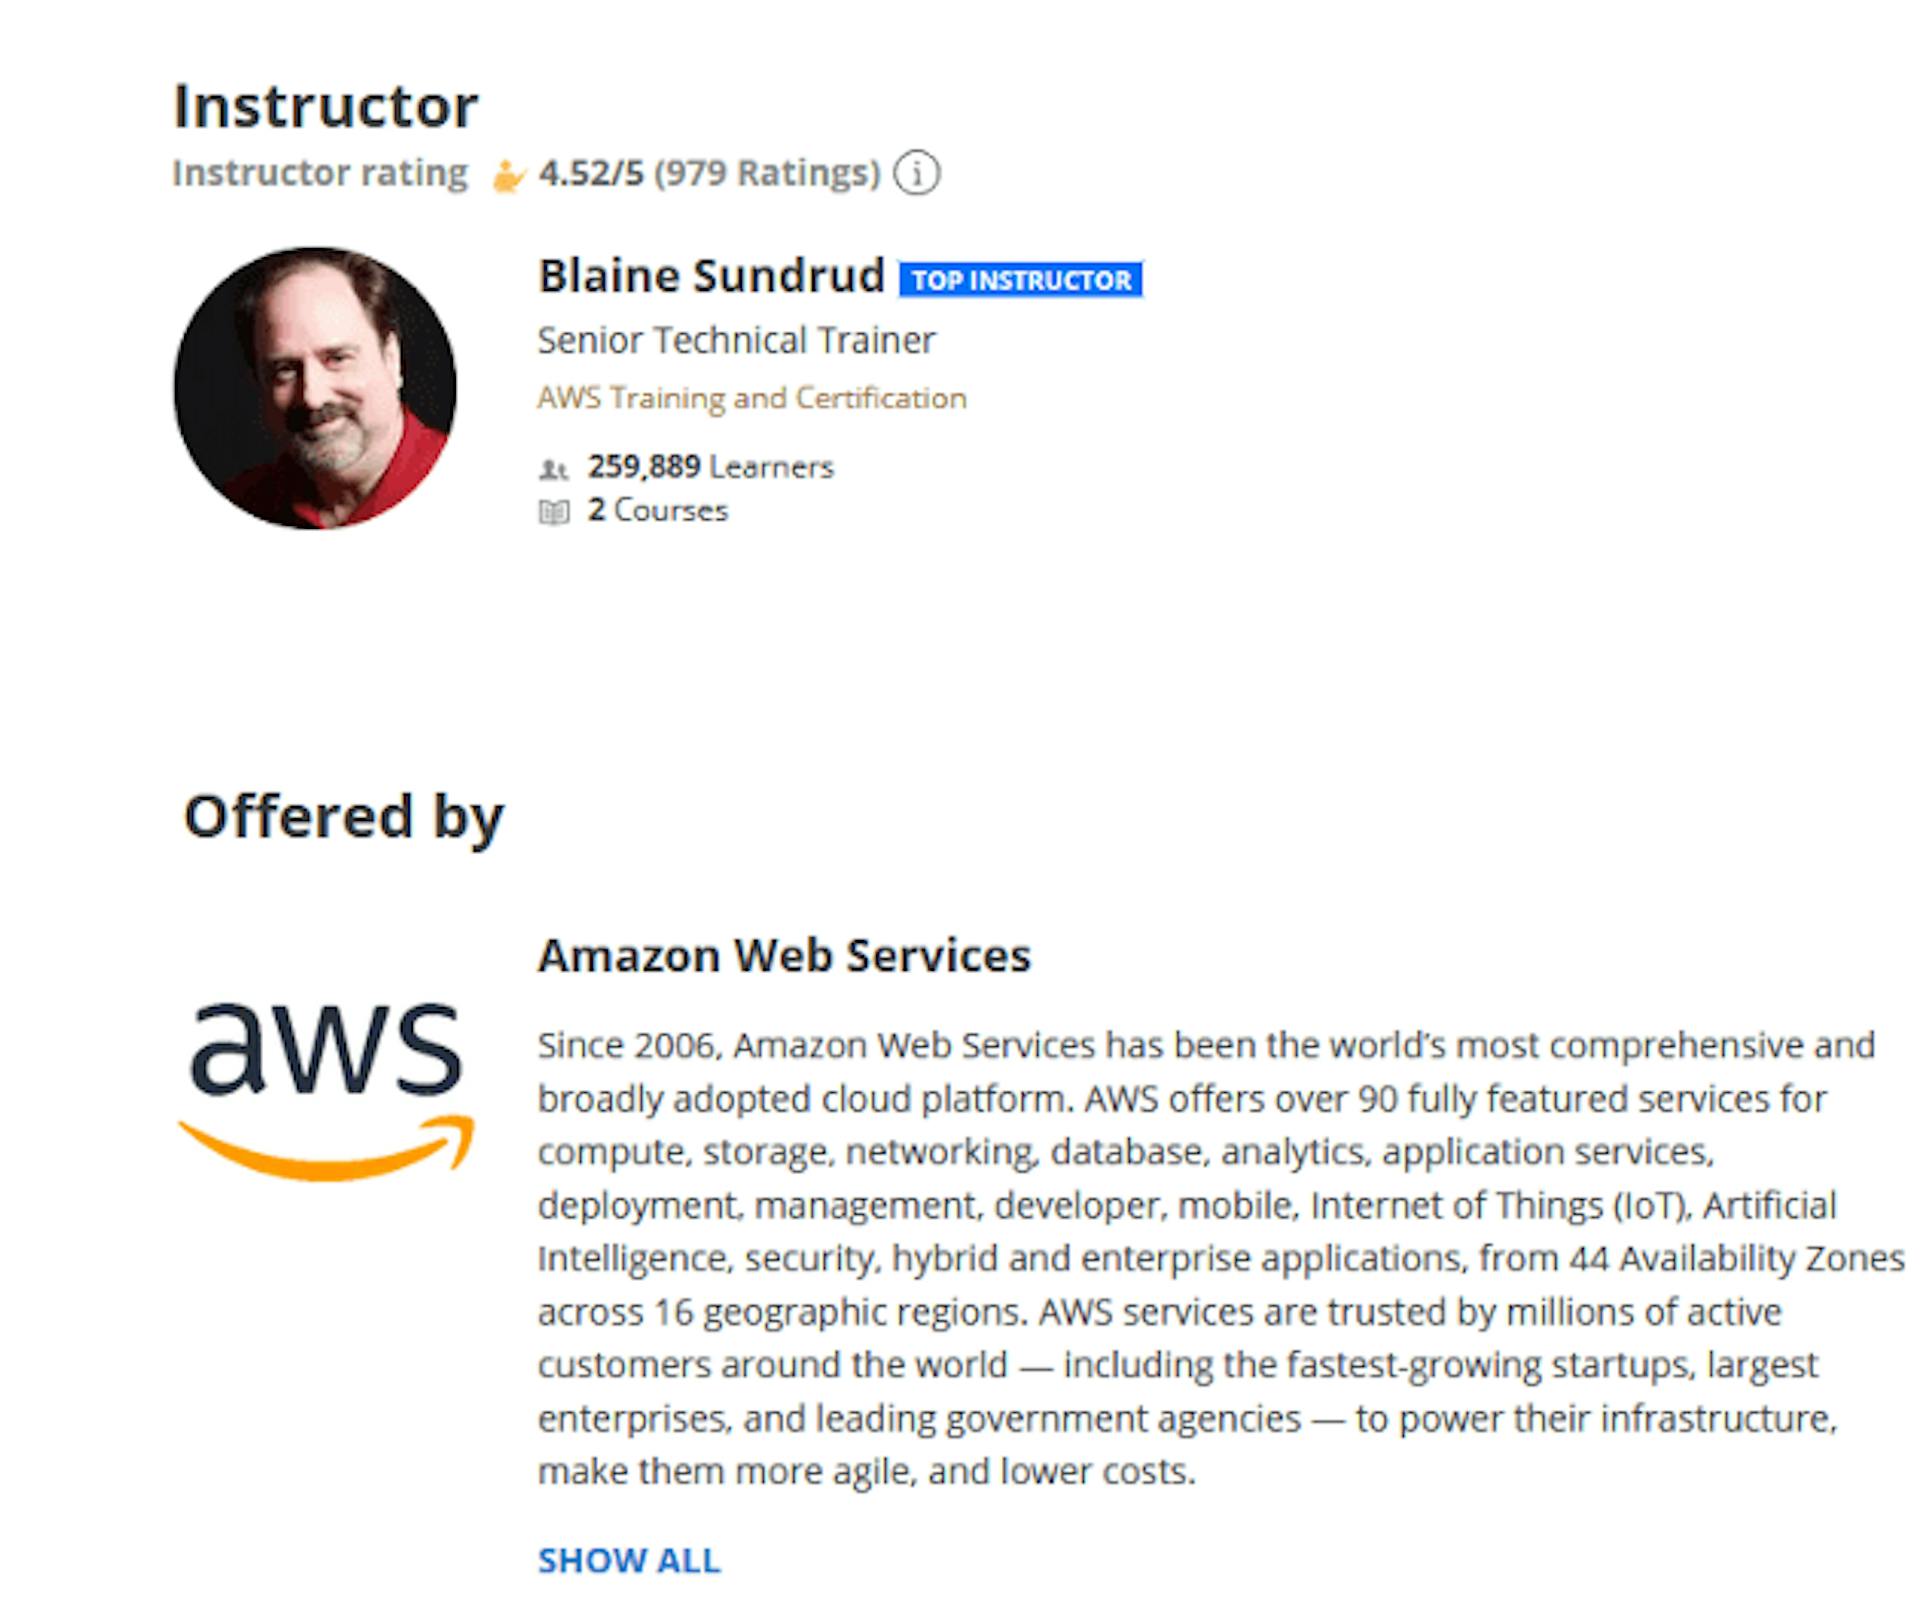 Getting Started with AWS Machine Learning from Amazon Web Services